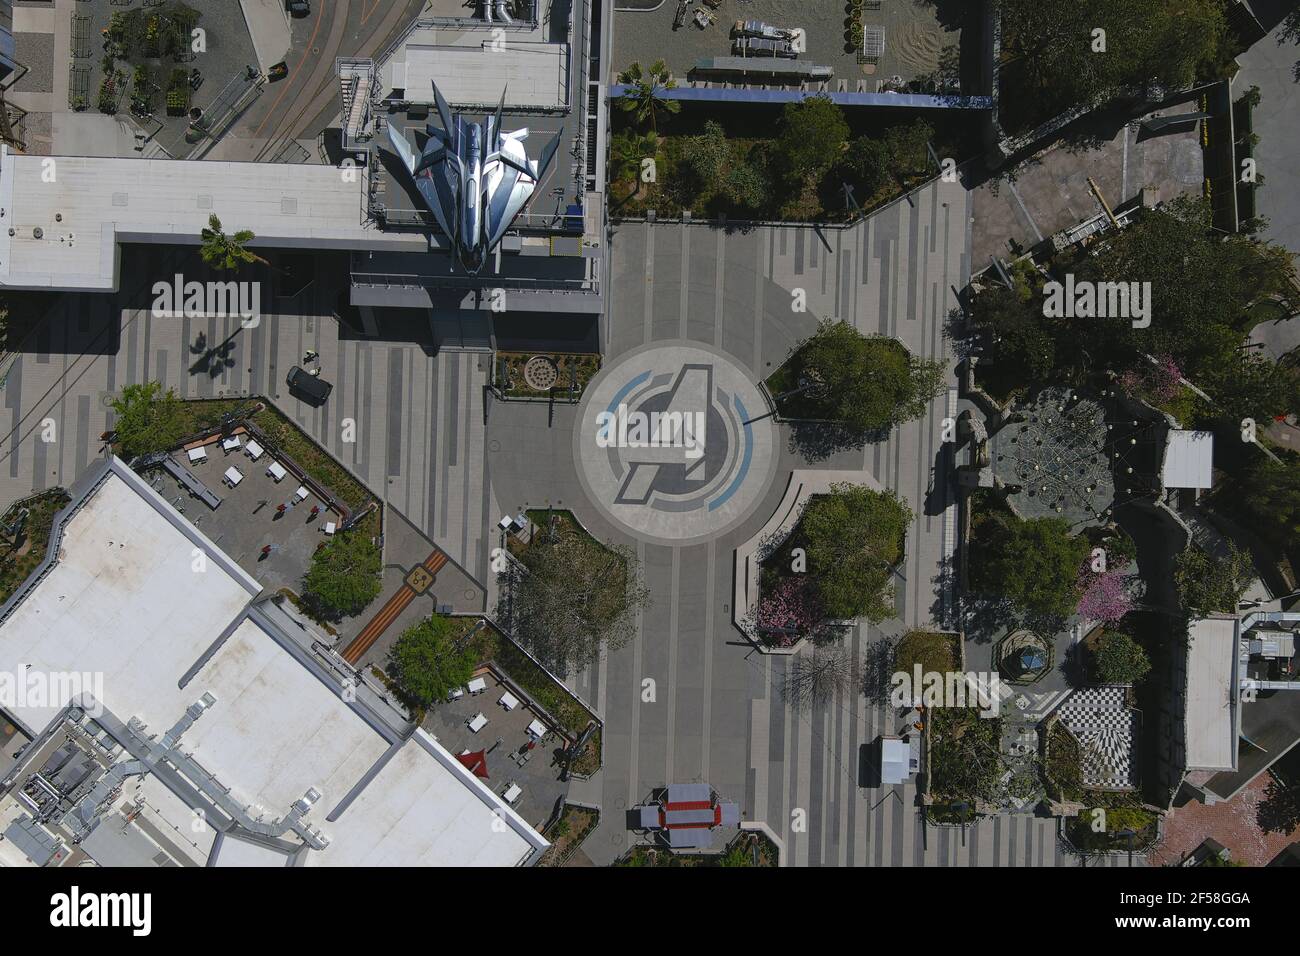 An aerial view of Avengers logo at Disney California Adventure Park, Wednesday, March 24, 2021, in Anaheim, Calif. Stock Photo